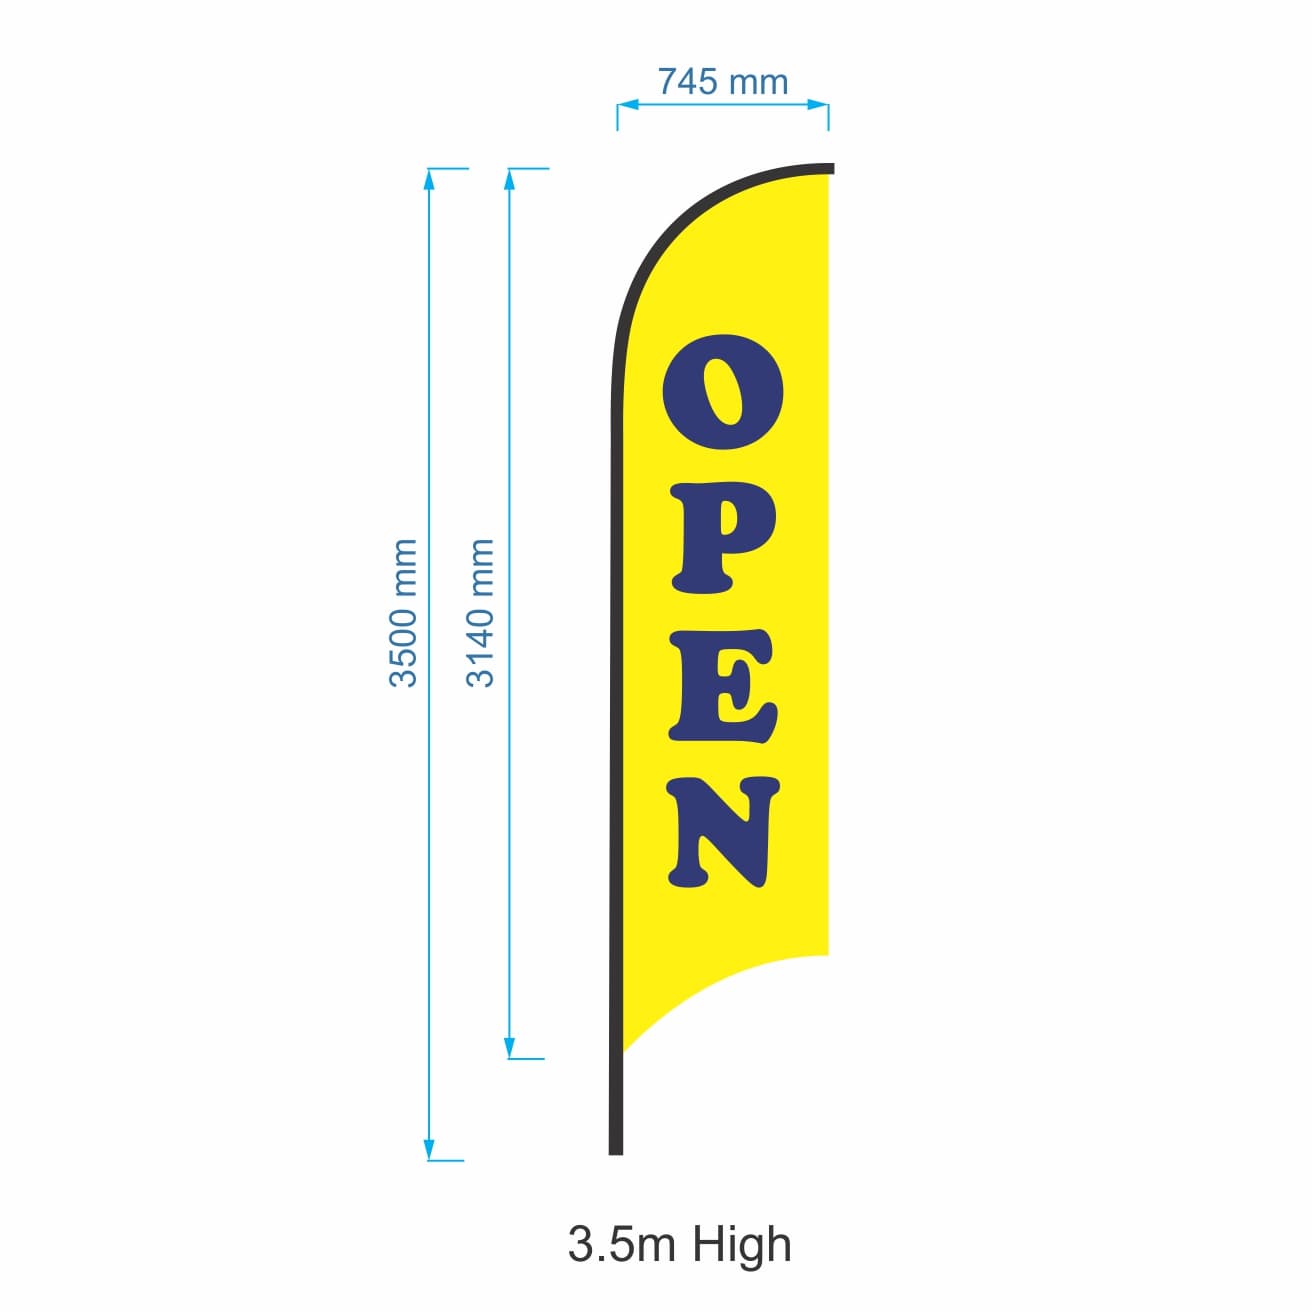 Open Sign Flags: Feather, Teardrop and Banner Flags for Your Business